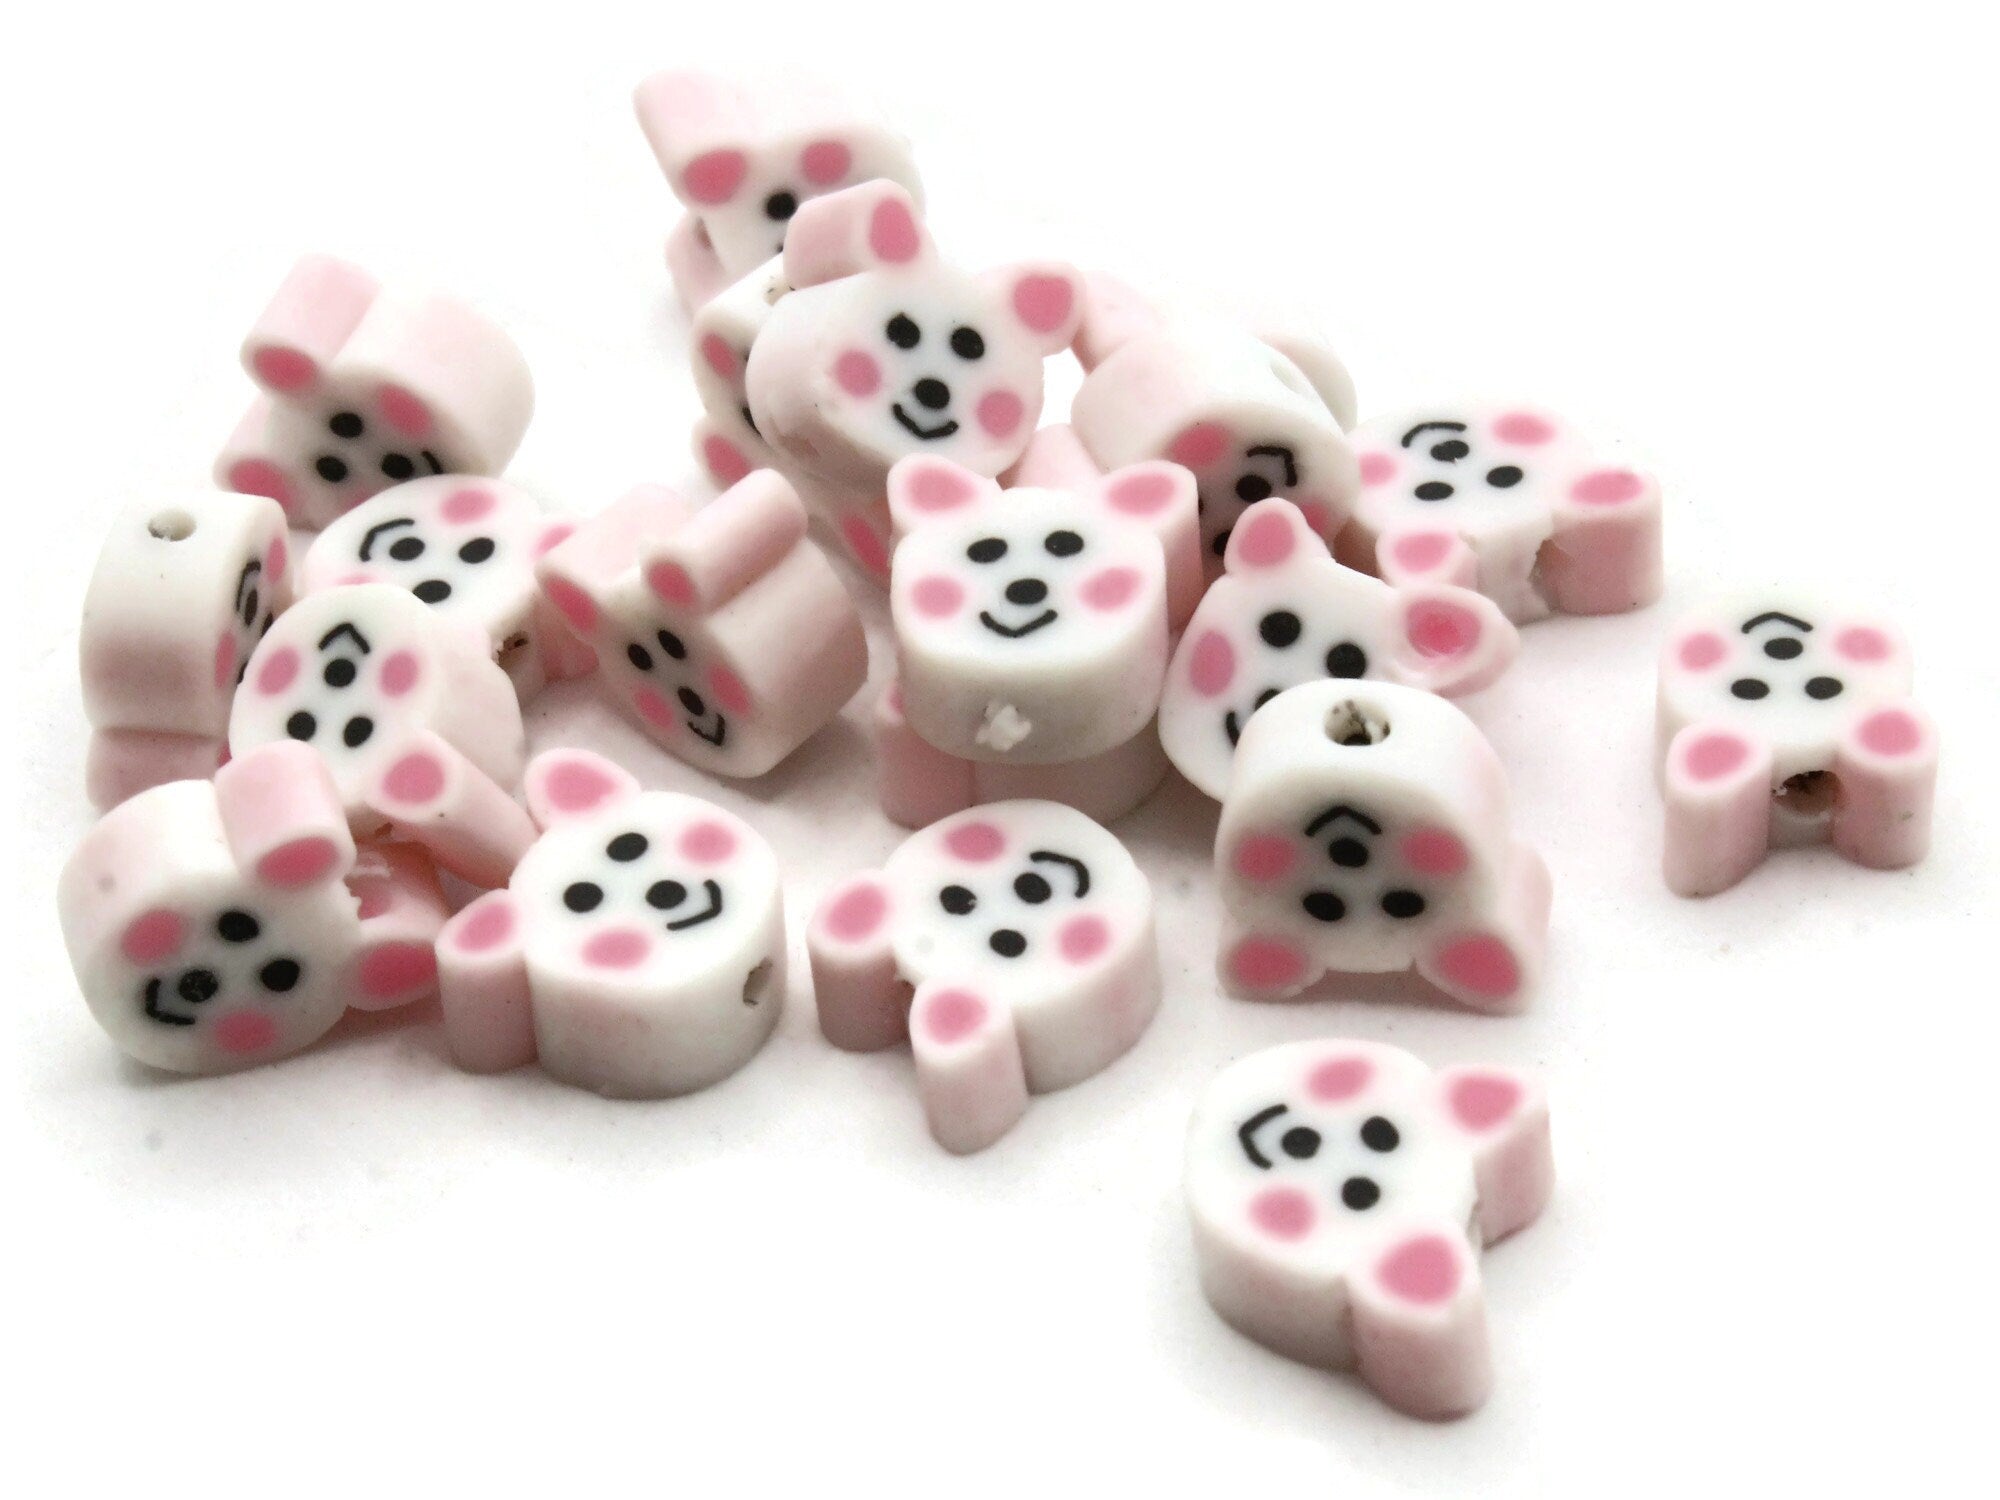 20 White Bunny Head Beads - Rabbit Polymer Clay Beads by Smileyboy Beads | Michaels